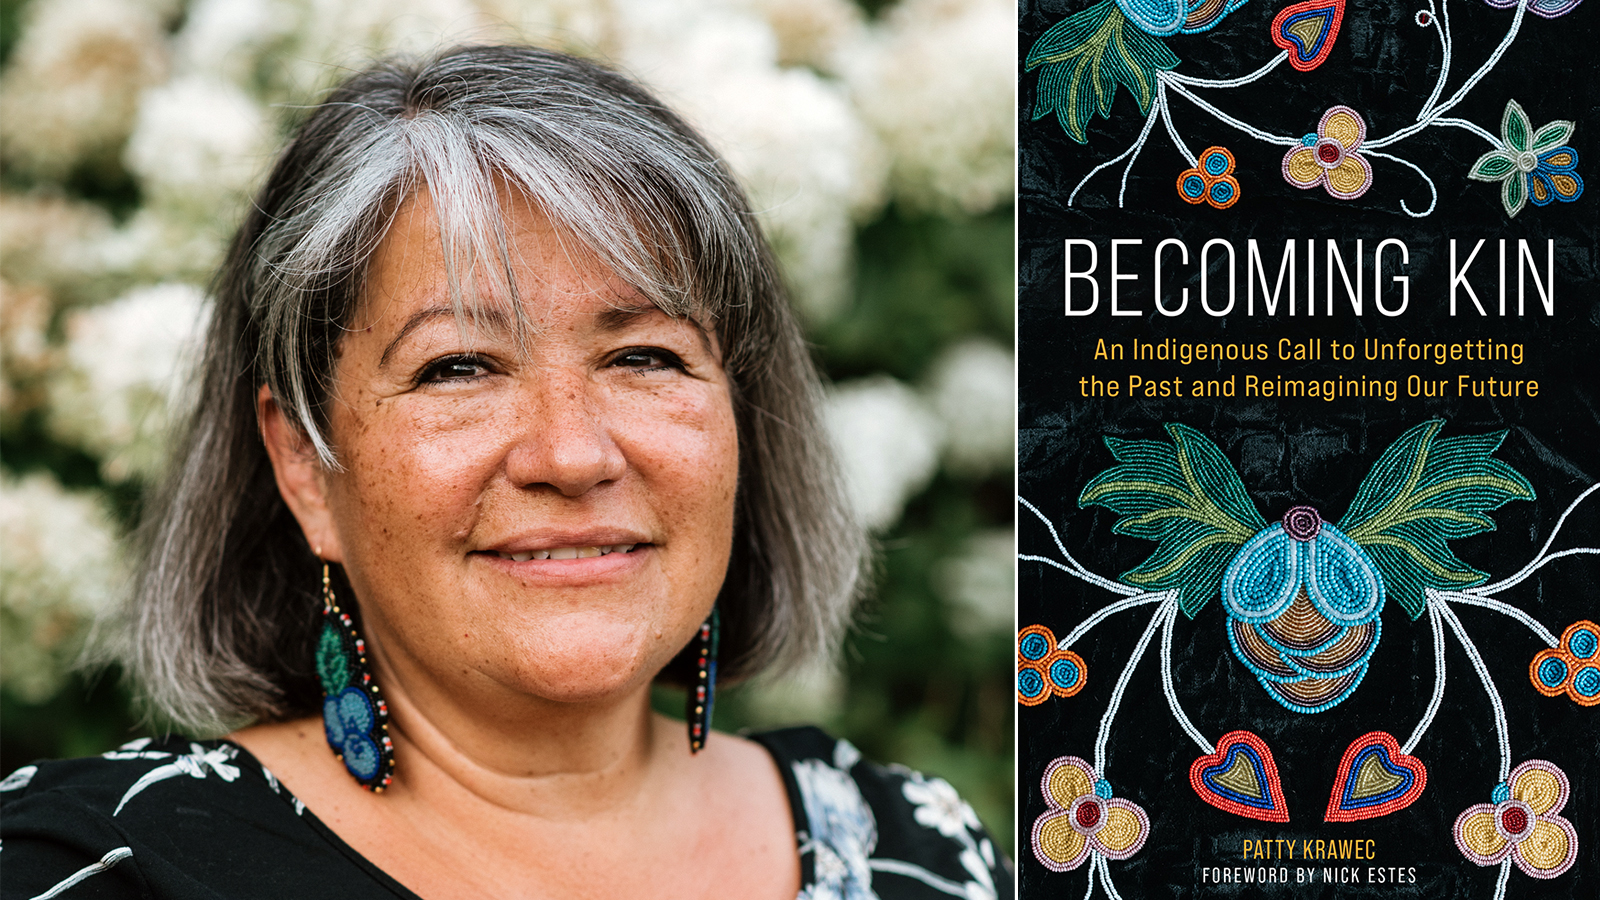 Author Patty Krawec and the cover of “Becoming Kin: An Indigenous Call to Unforgetting the Past and Reimagining Our Future." Courtesy images